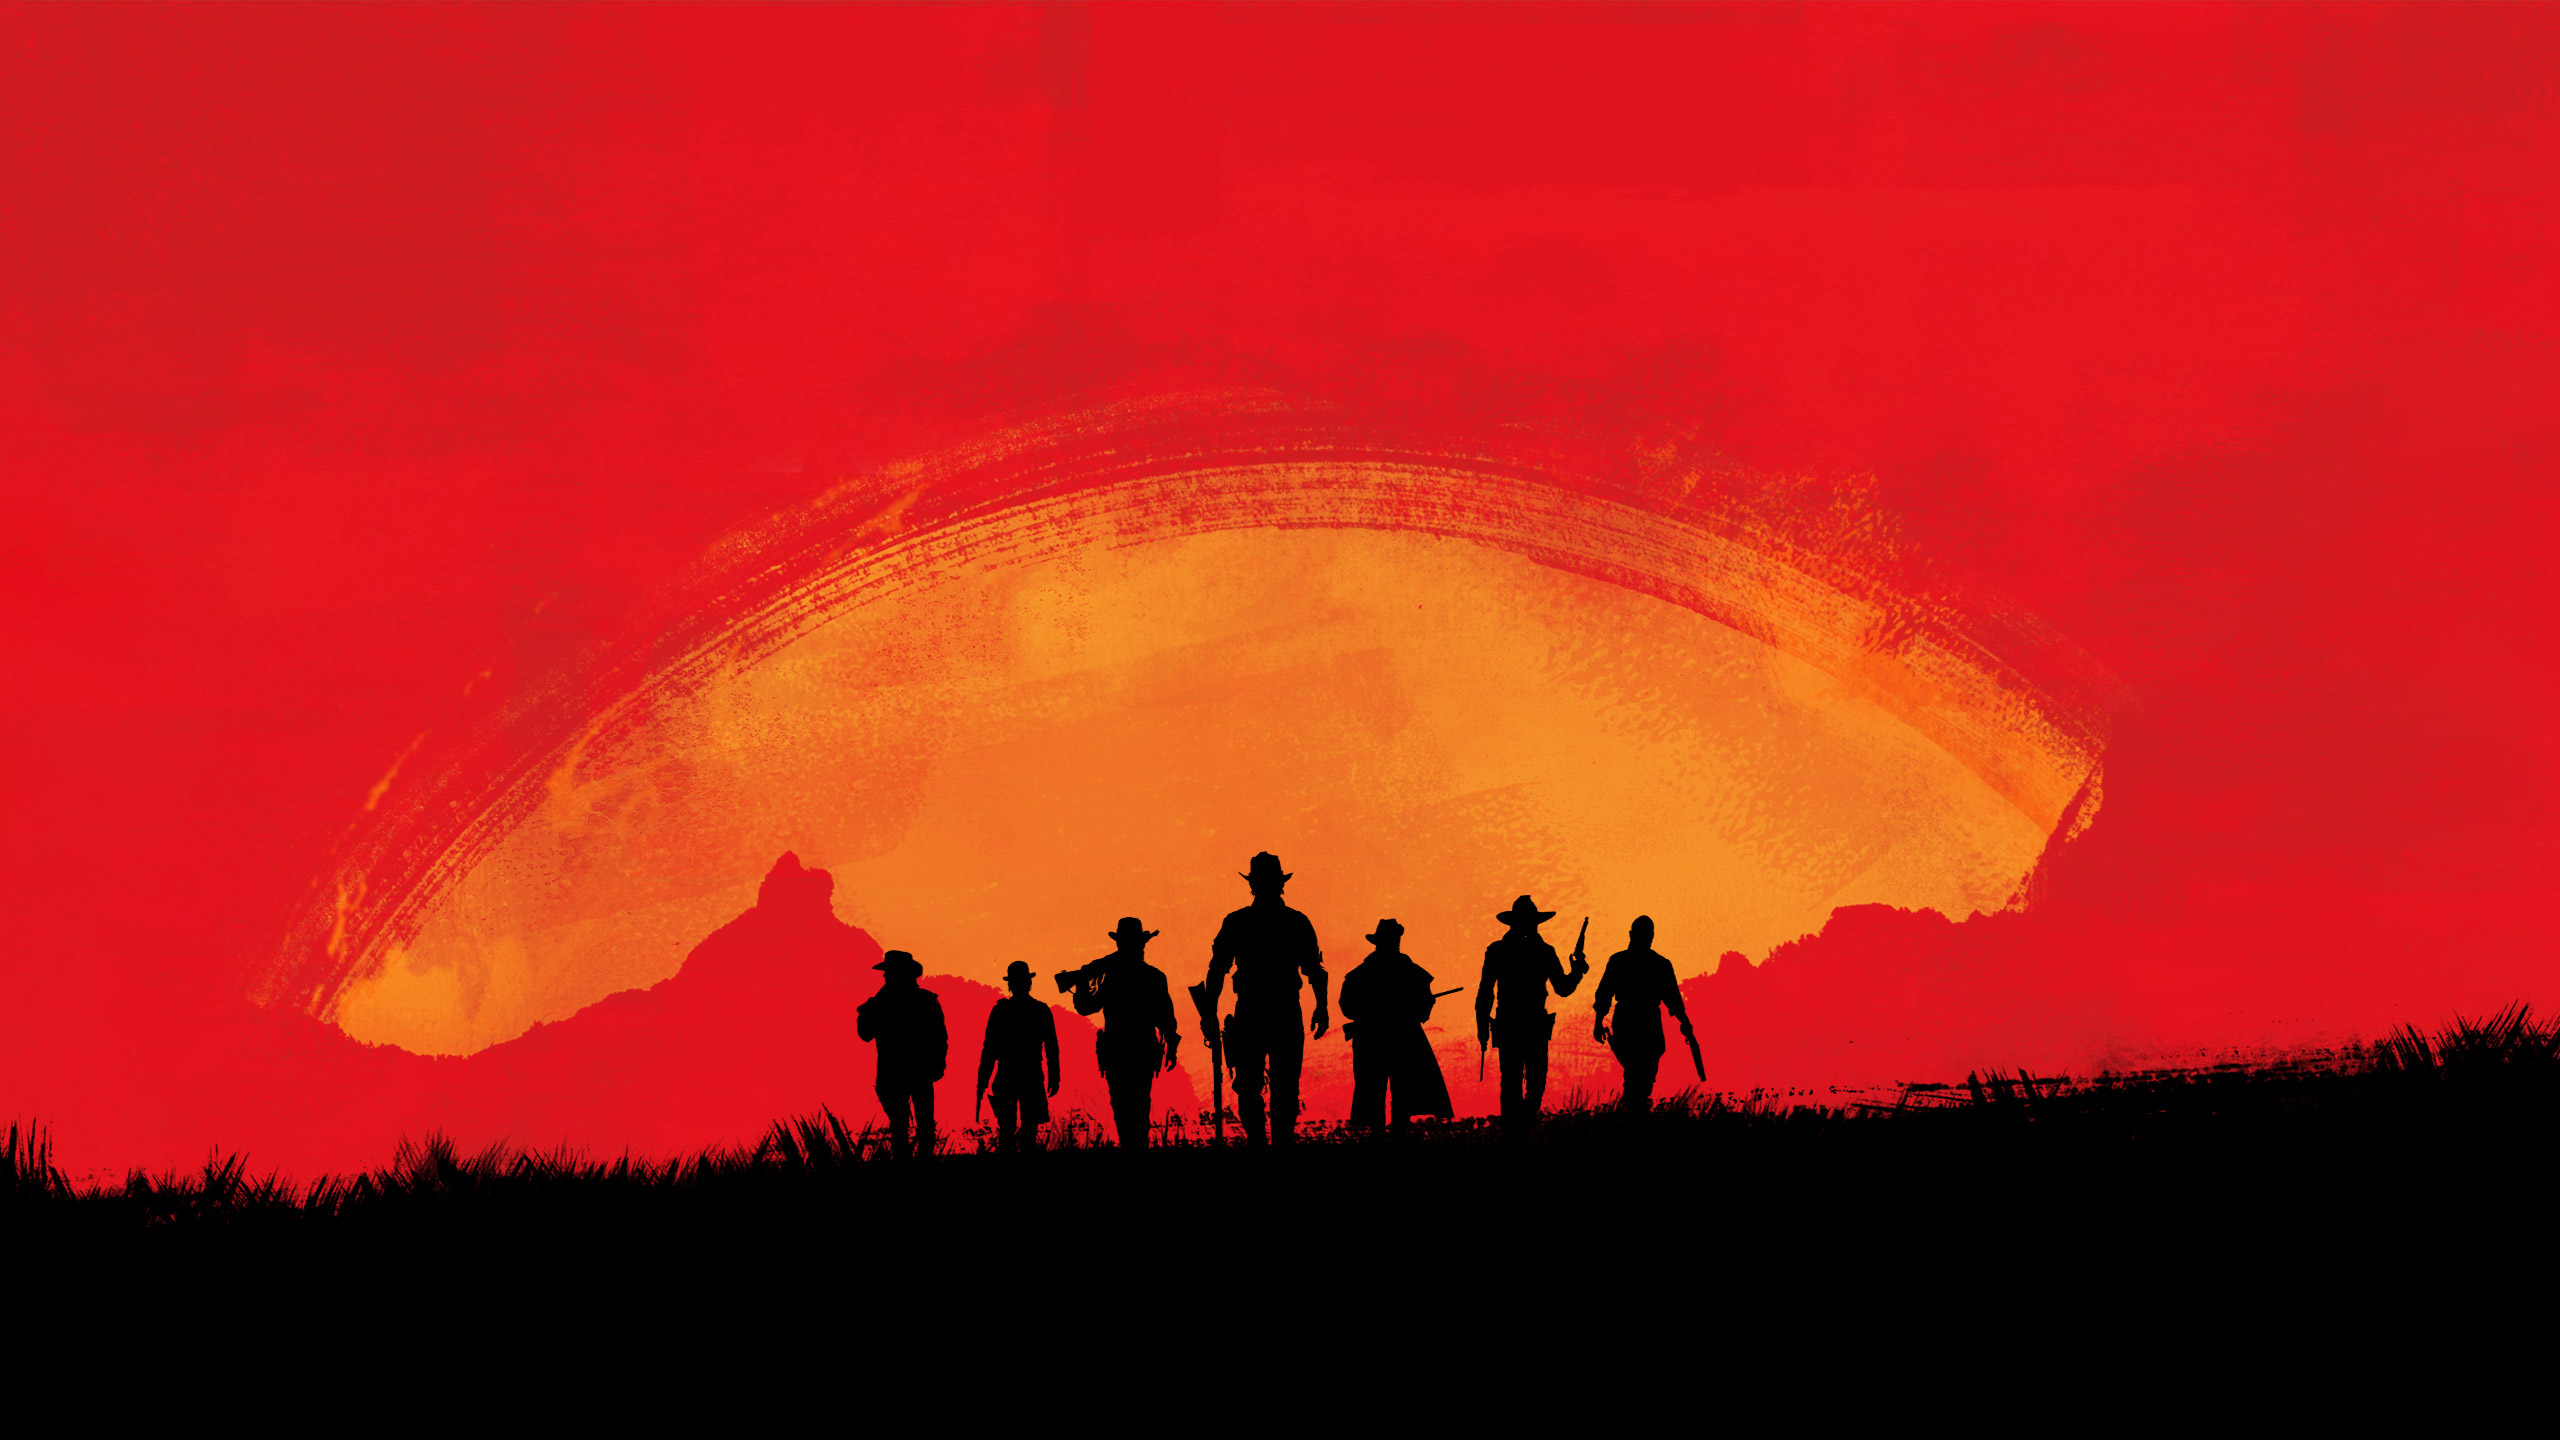 Red Dead Redemption HD Wallpaper Background Image